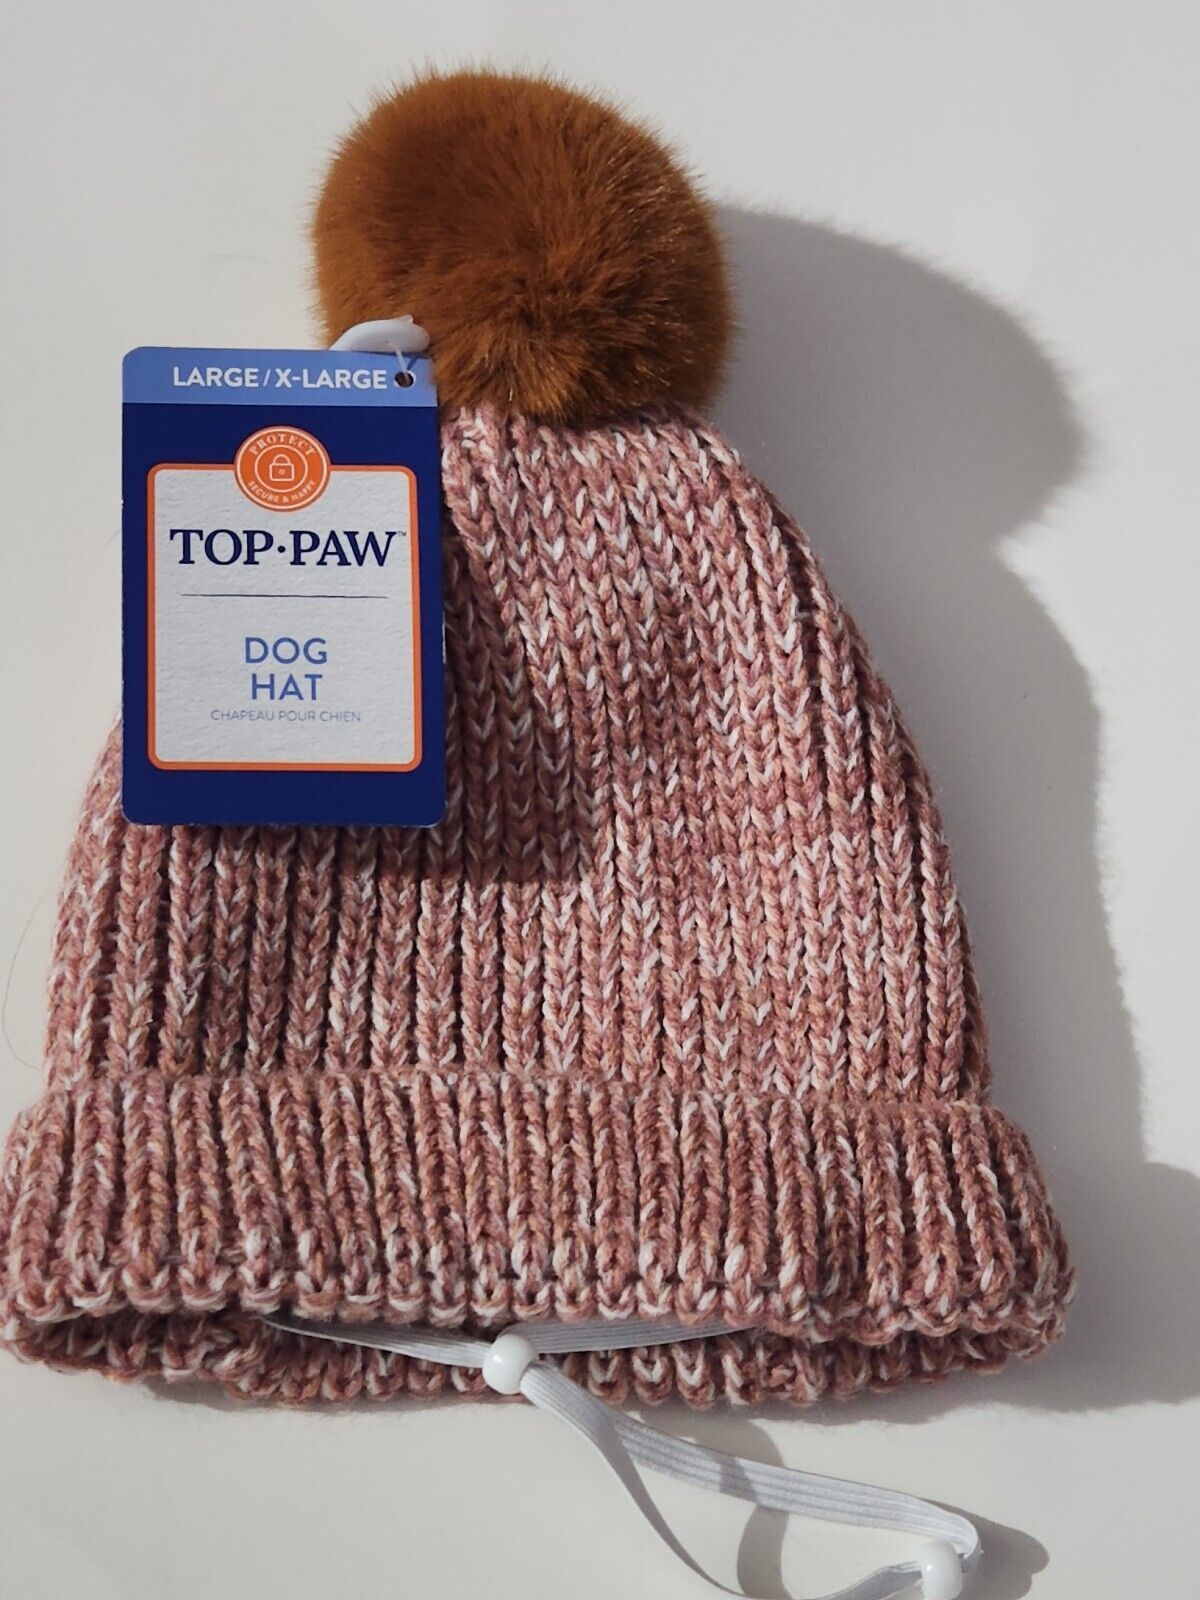 Primary image for Top Paw Pink Pom Beanie Dog Hat Size Large/X-Large